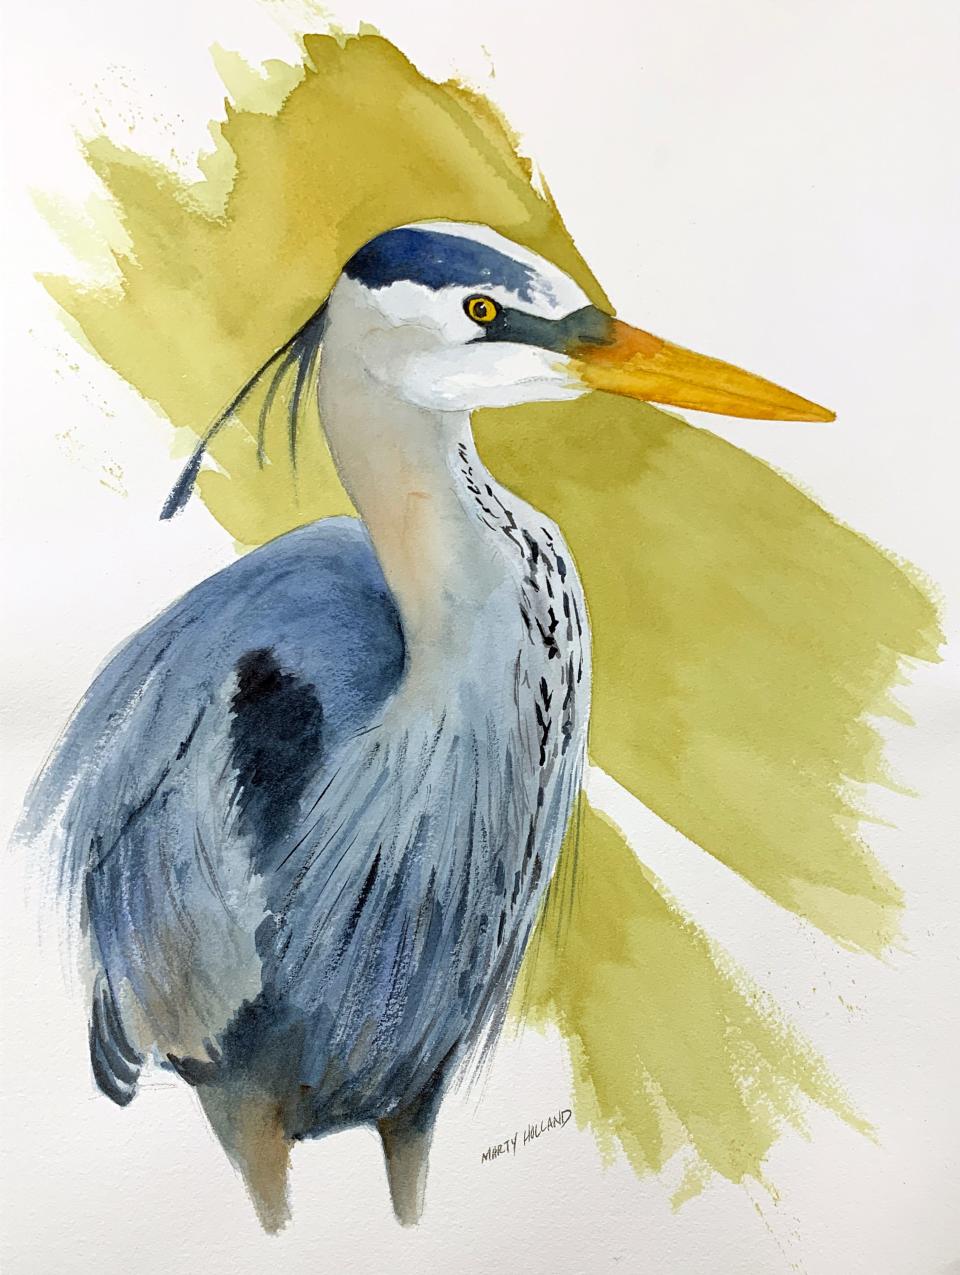 "Heron": Coastal life is a favorite subject for Marty Holland.